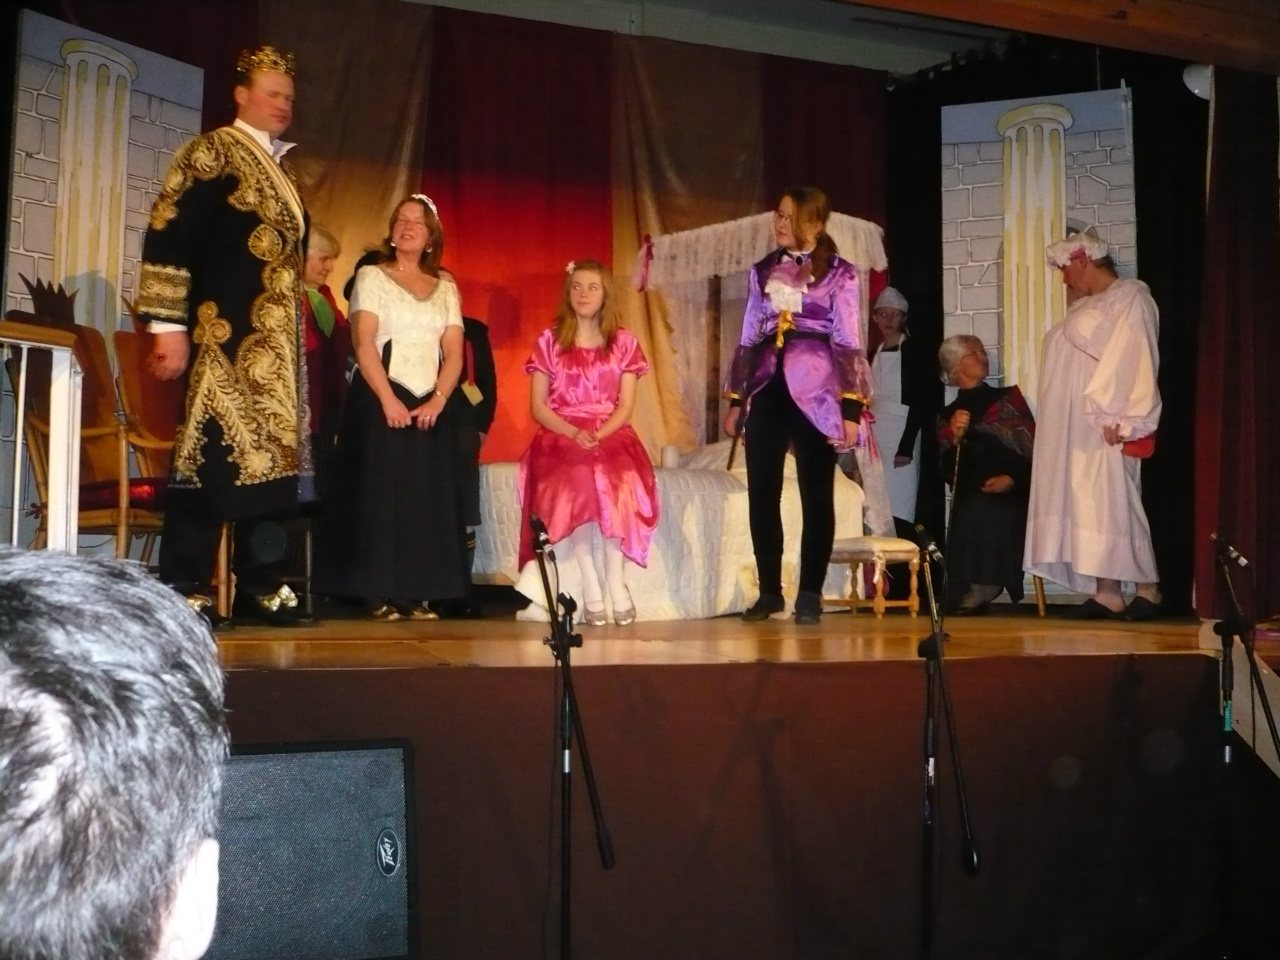 Toller Porcorum Village Hall, West Dorset - Panto - example of a stage performance